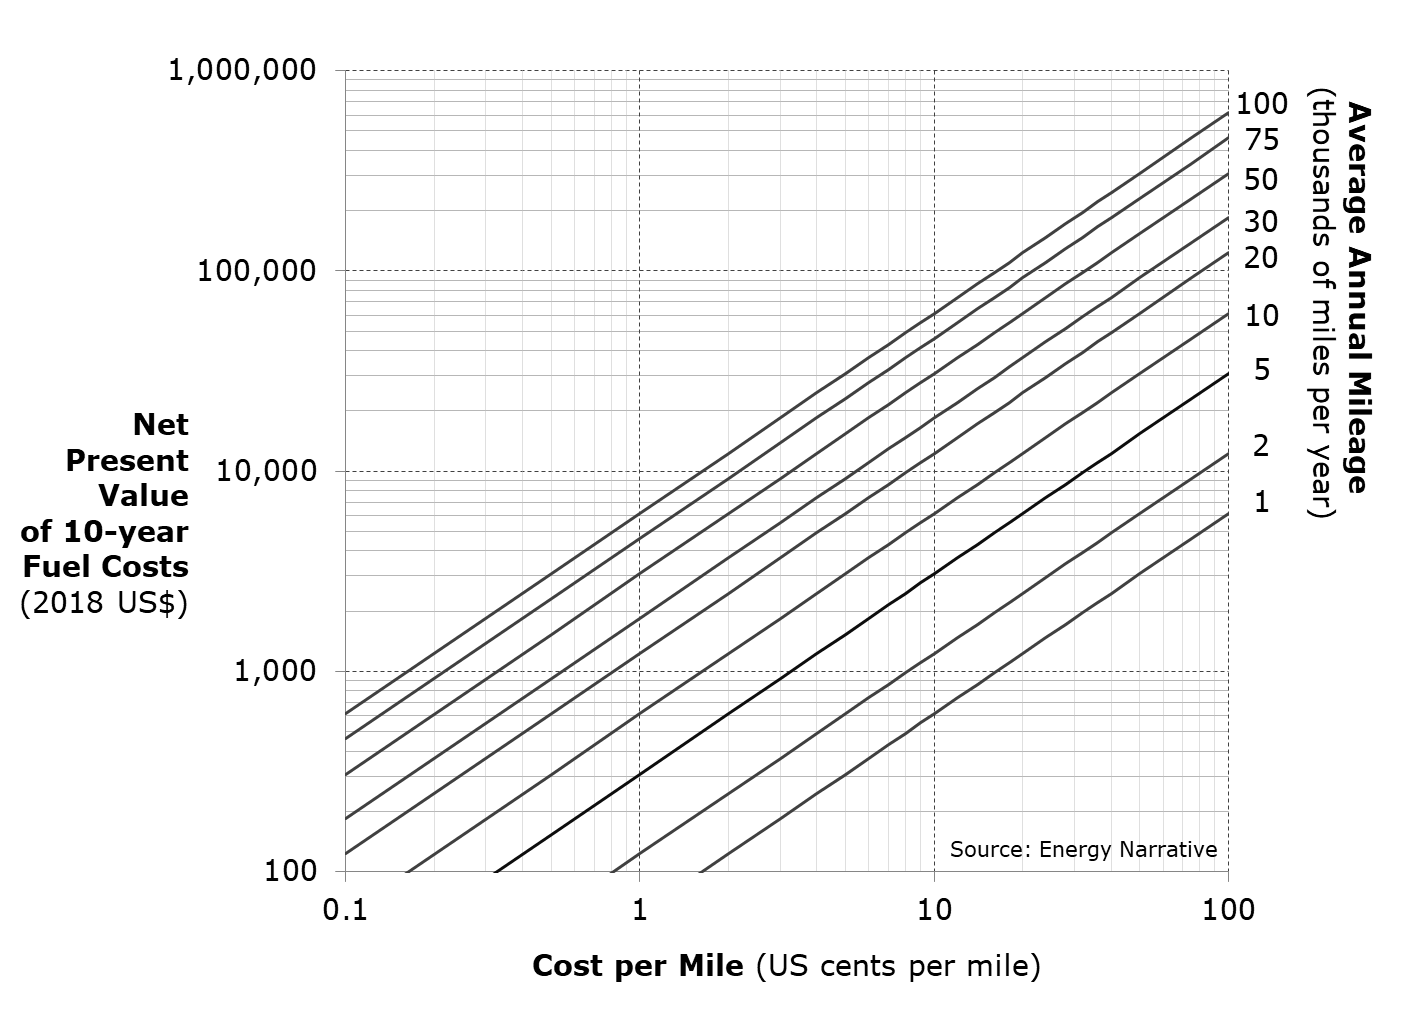 A graphical calculation of the net present value of vehicle fuel costs over 10 years